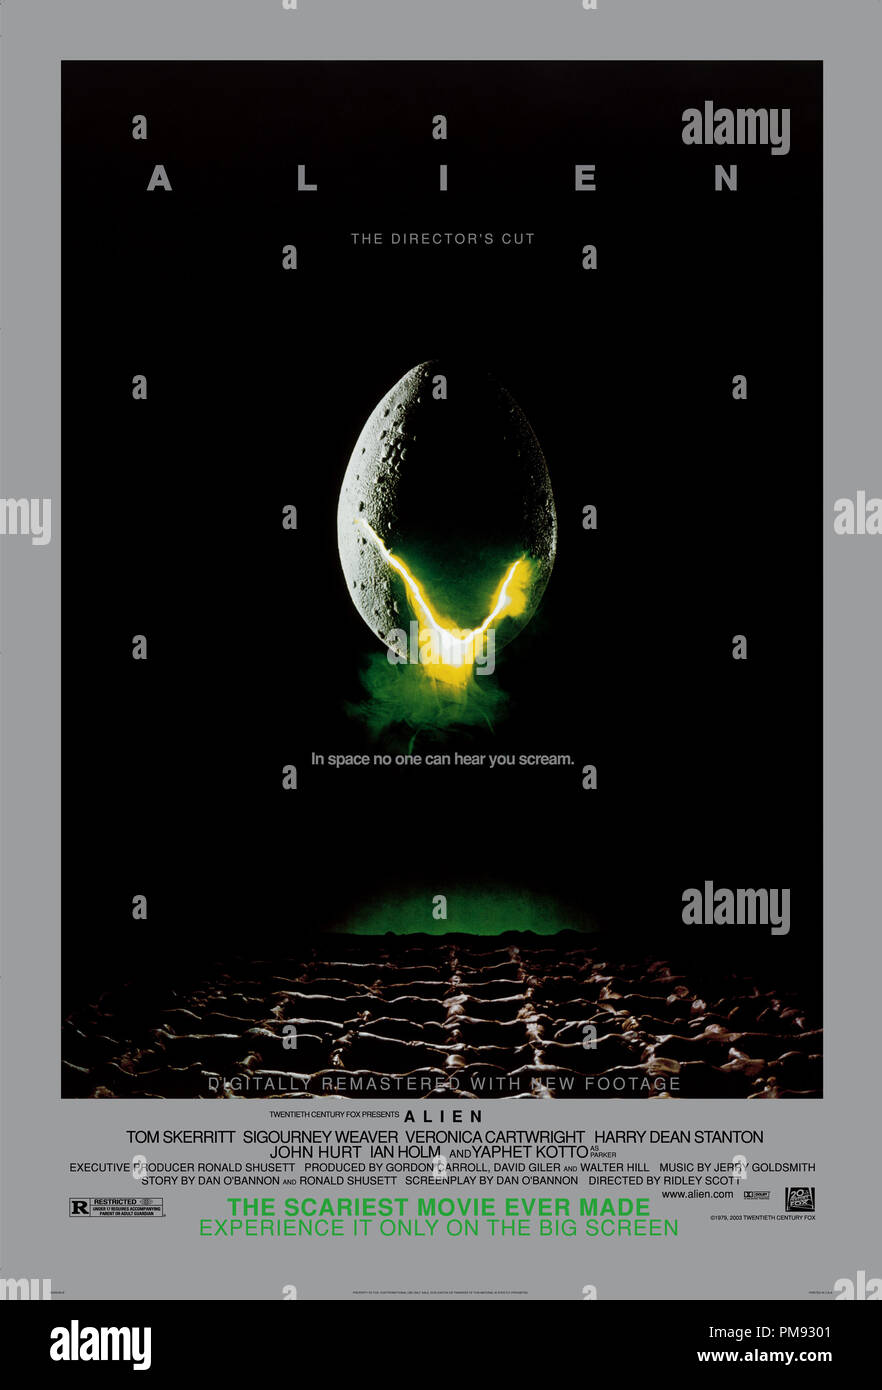 https://c8.alamy.com/comp/PM9301/poster-from-alien-the-directors-cut-1979-file-reference-31537-360tha-PM9301.jpg